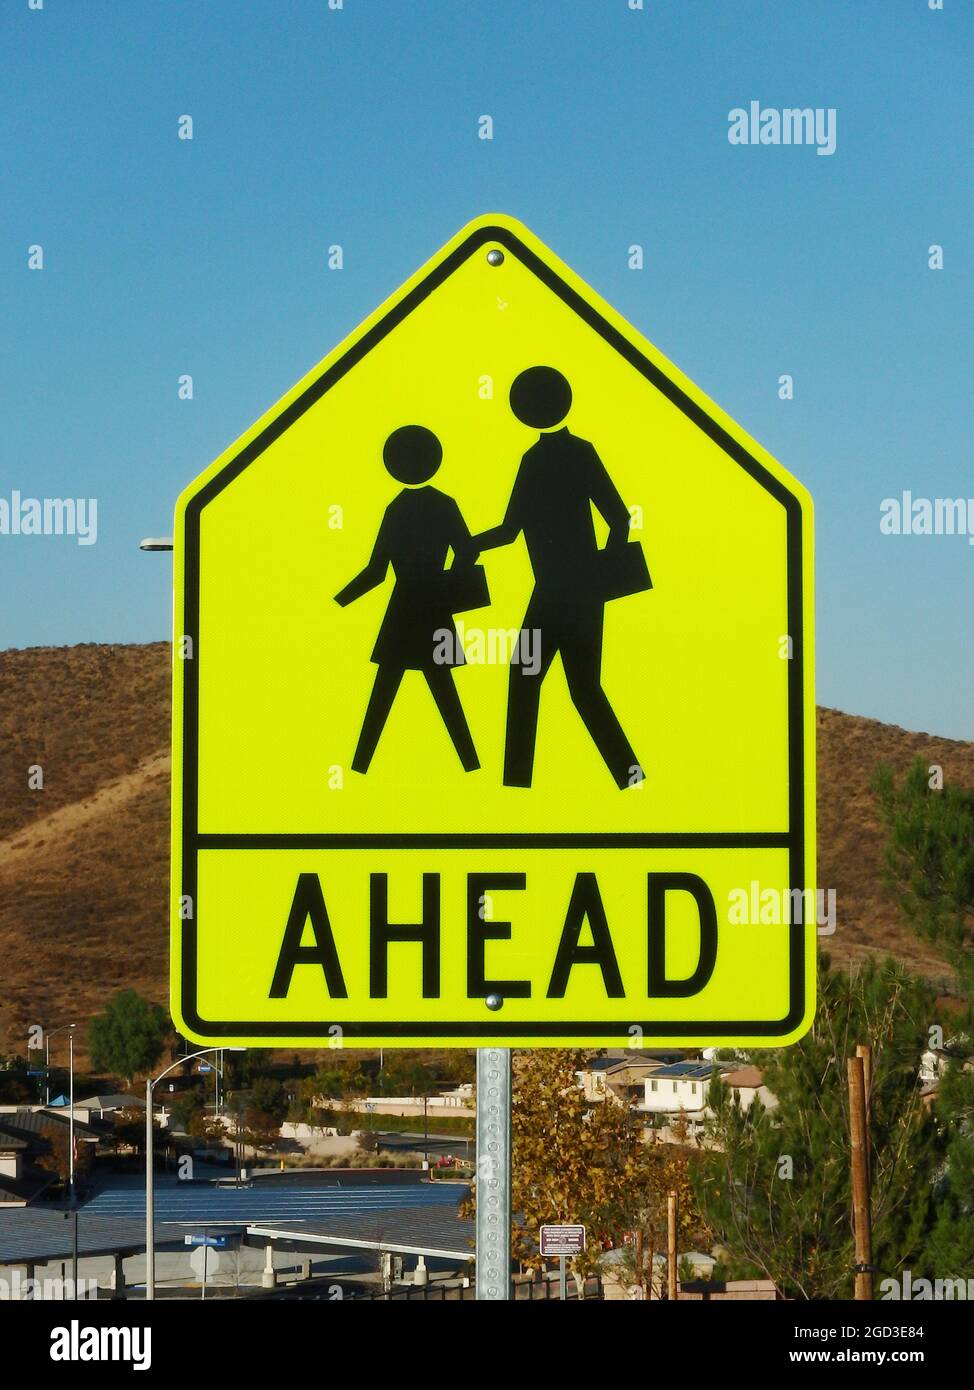 Close up view of school crossing ahead sign Stock Photo